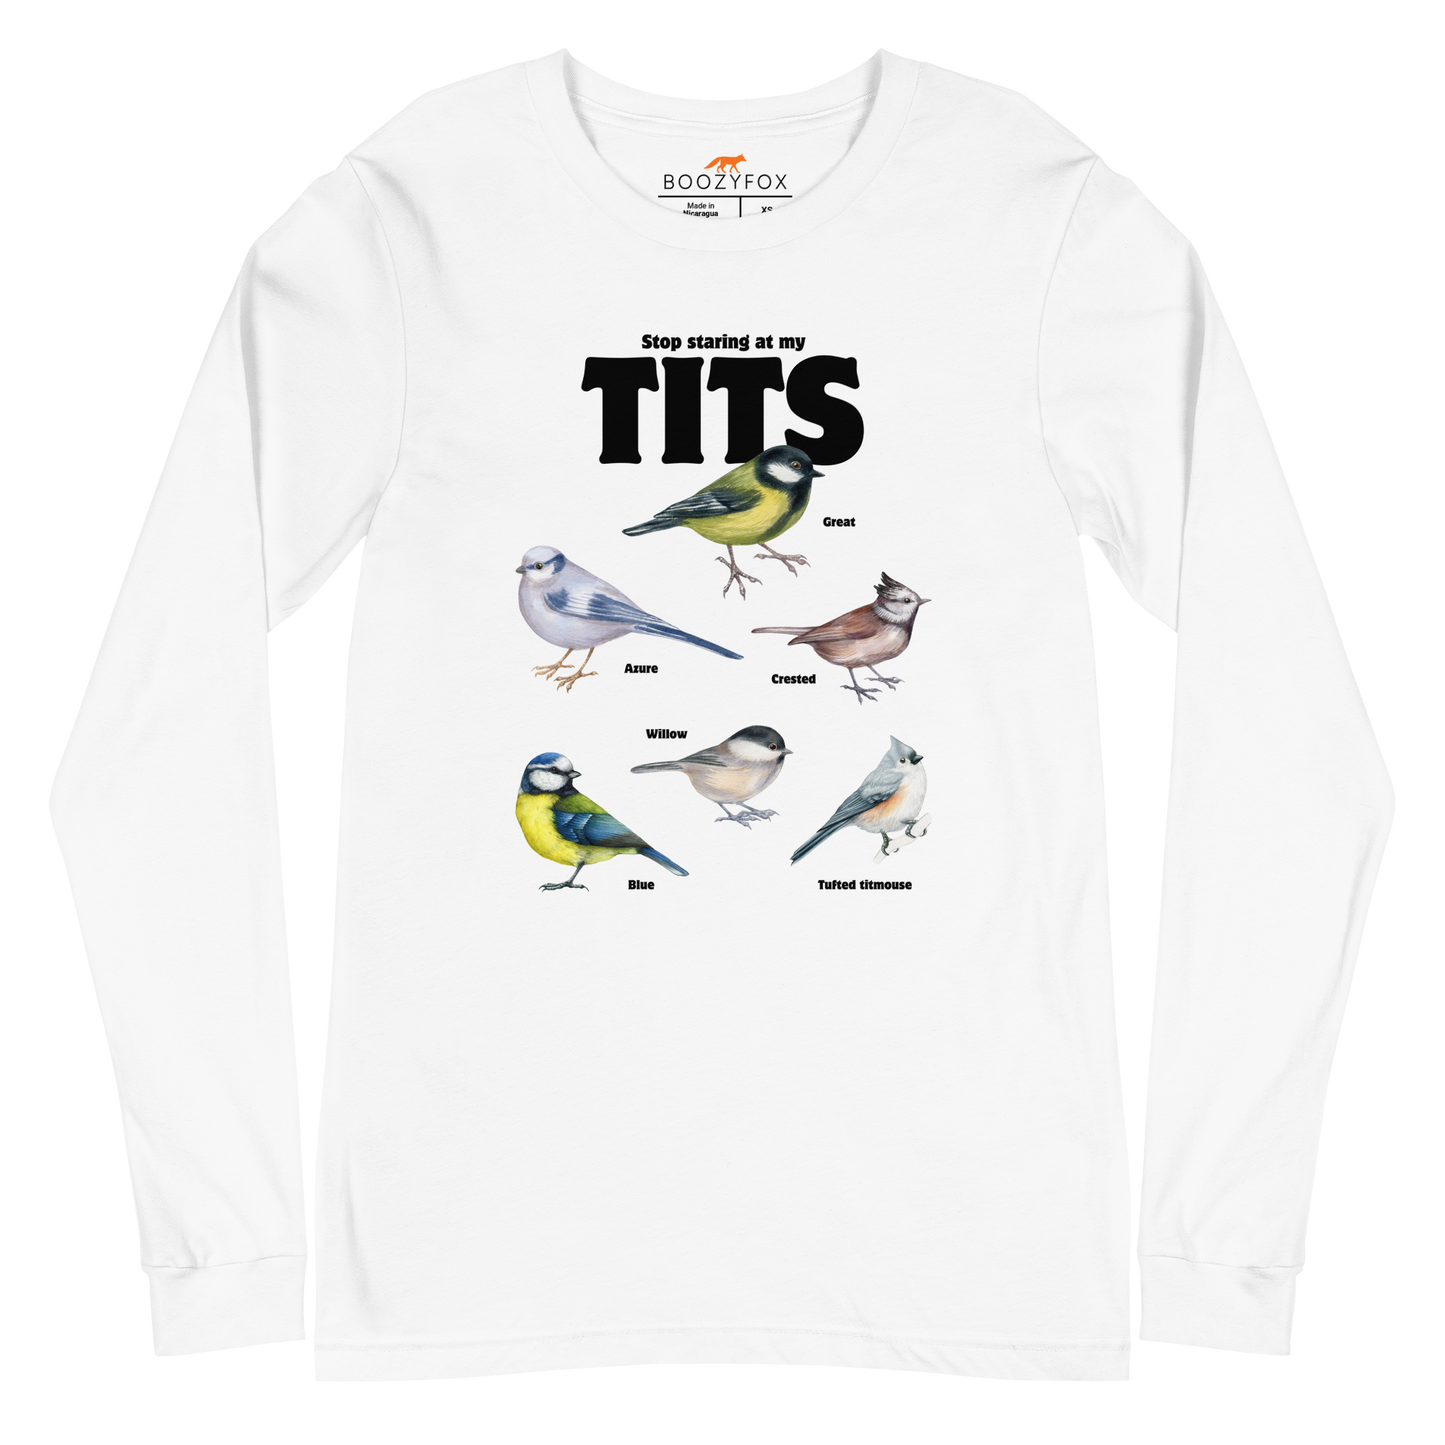 White Tit Long Sleeve Tee featuring a funny Stop Staring At My Tits graphic on the chest - Funny Tit Bird Long Sleeve Graphic Tees - Boozy Fox